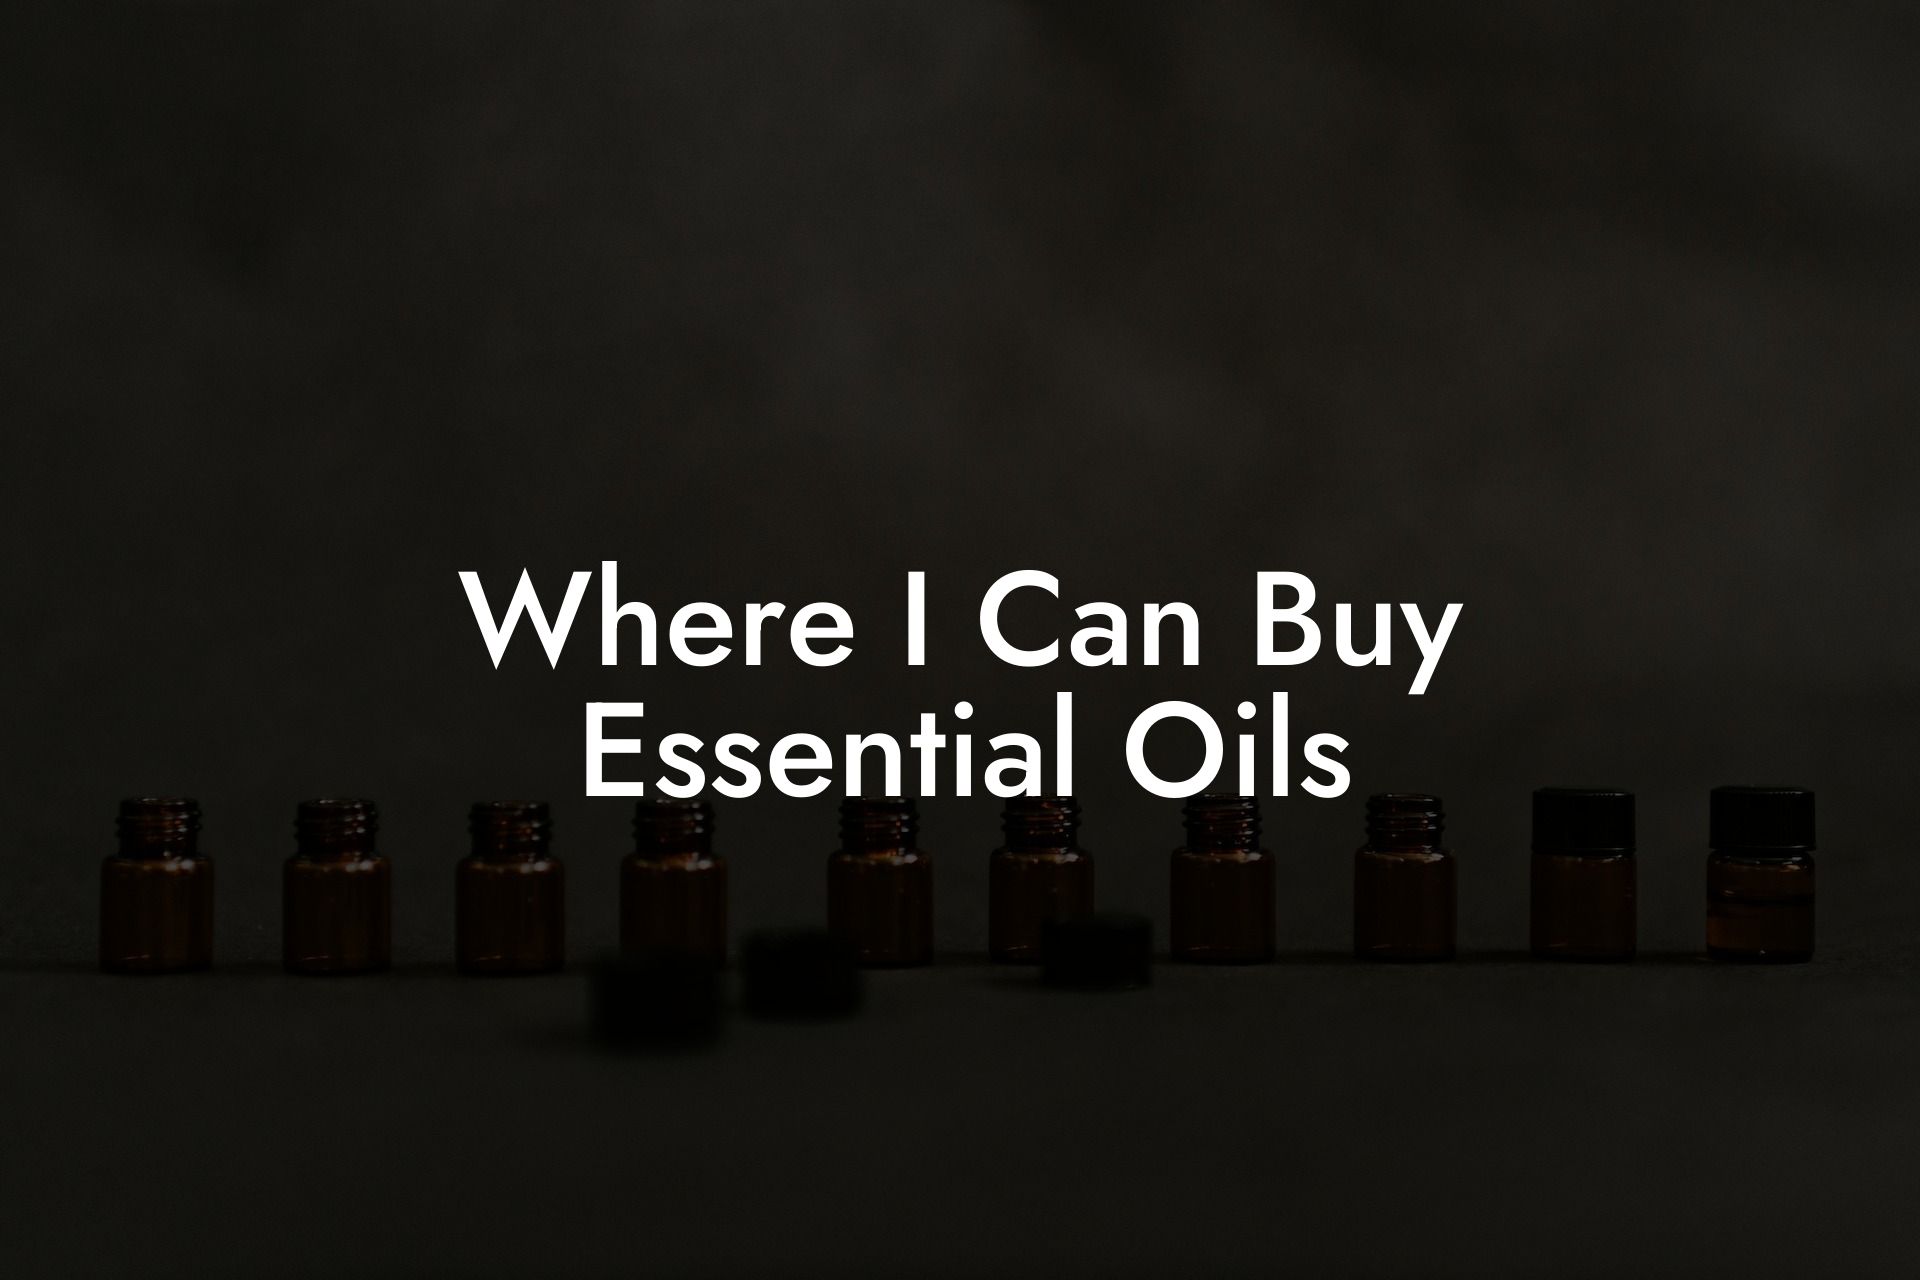 Where I Can Buy Essential Oils